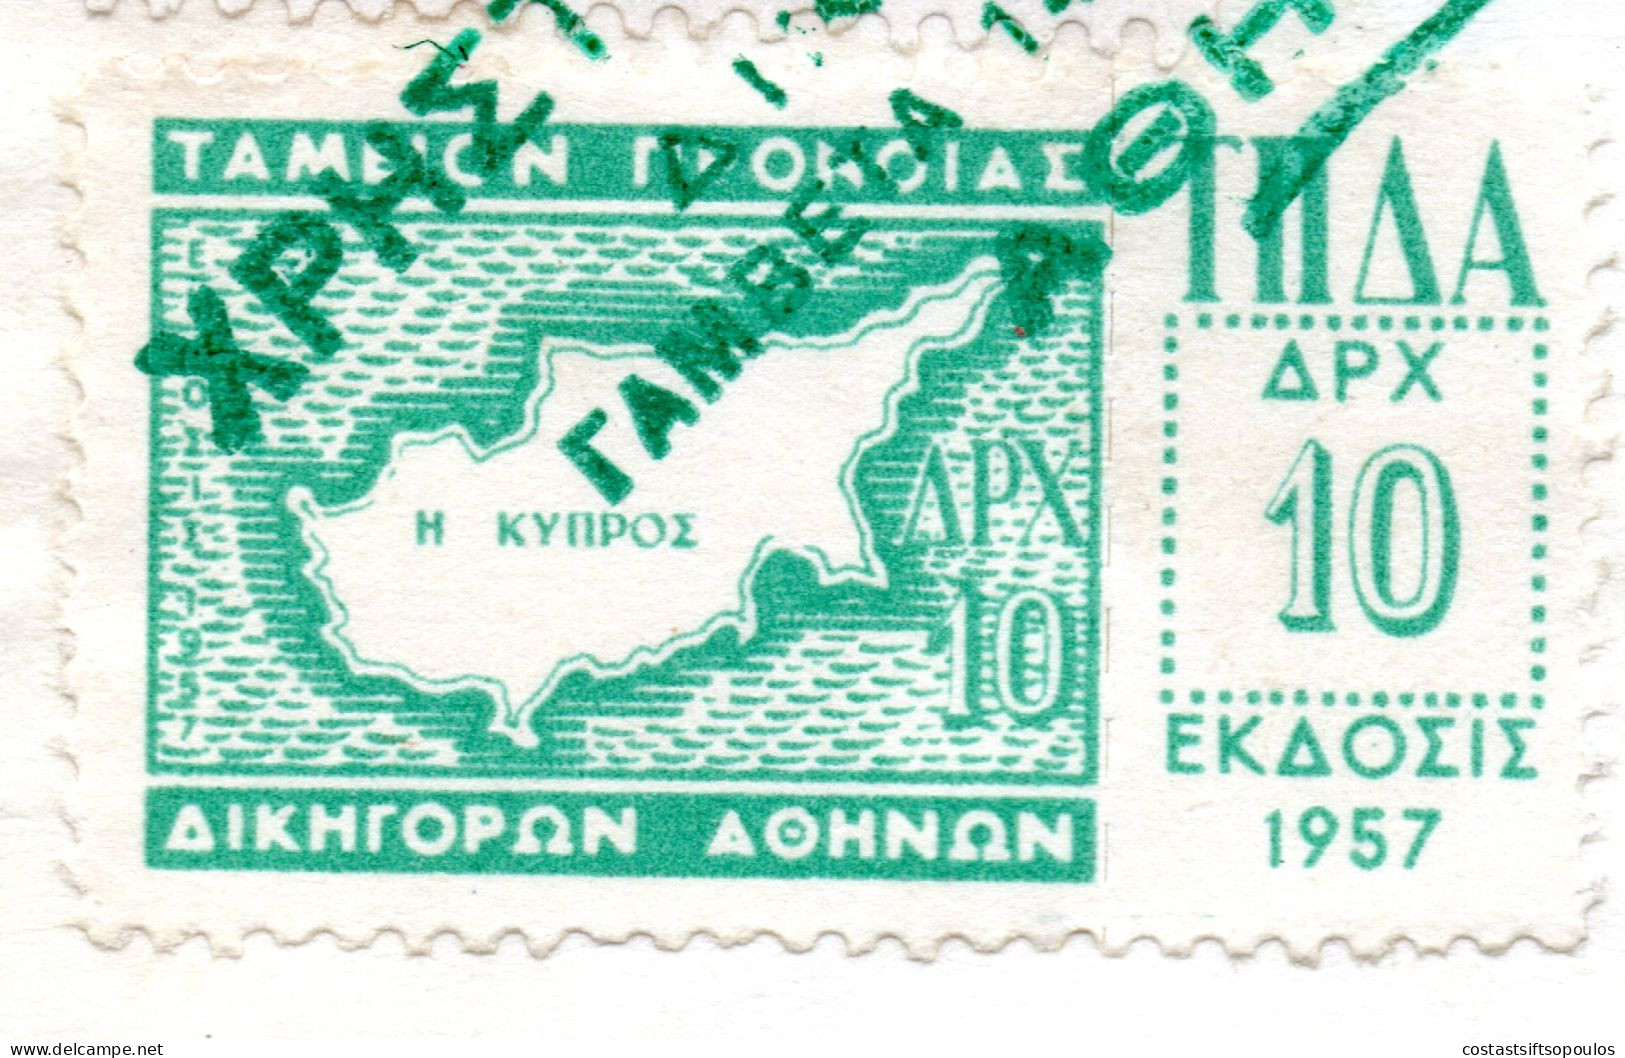 2505. GREECE. 1960 6 PAGES DOCUMENT WITH SCARCE 1957 CYPRUS MAP 10 DR. REVENUE. CROSS FOLDED. WILL BE SHIPPED FOLDED - Steuermarken